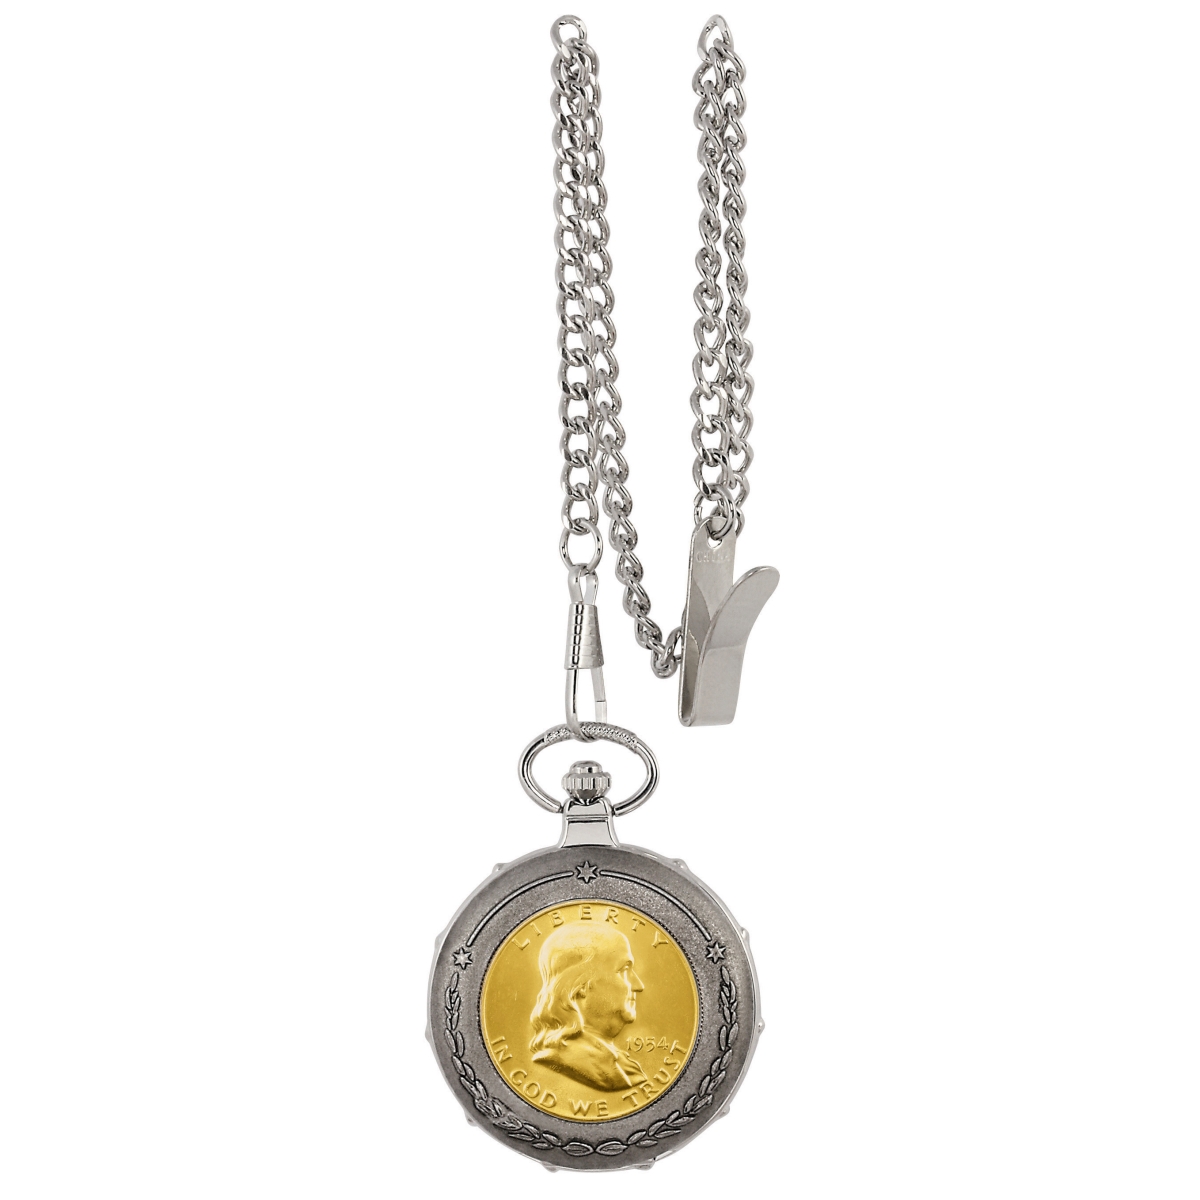 Picture of UPM Global 13215 Gold-Layered Silver Franklin Half Dollar Silvertone Train Coin Pocket Watch